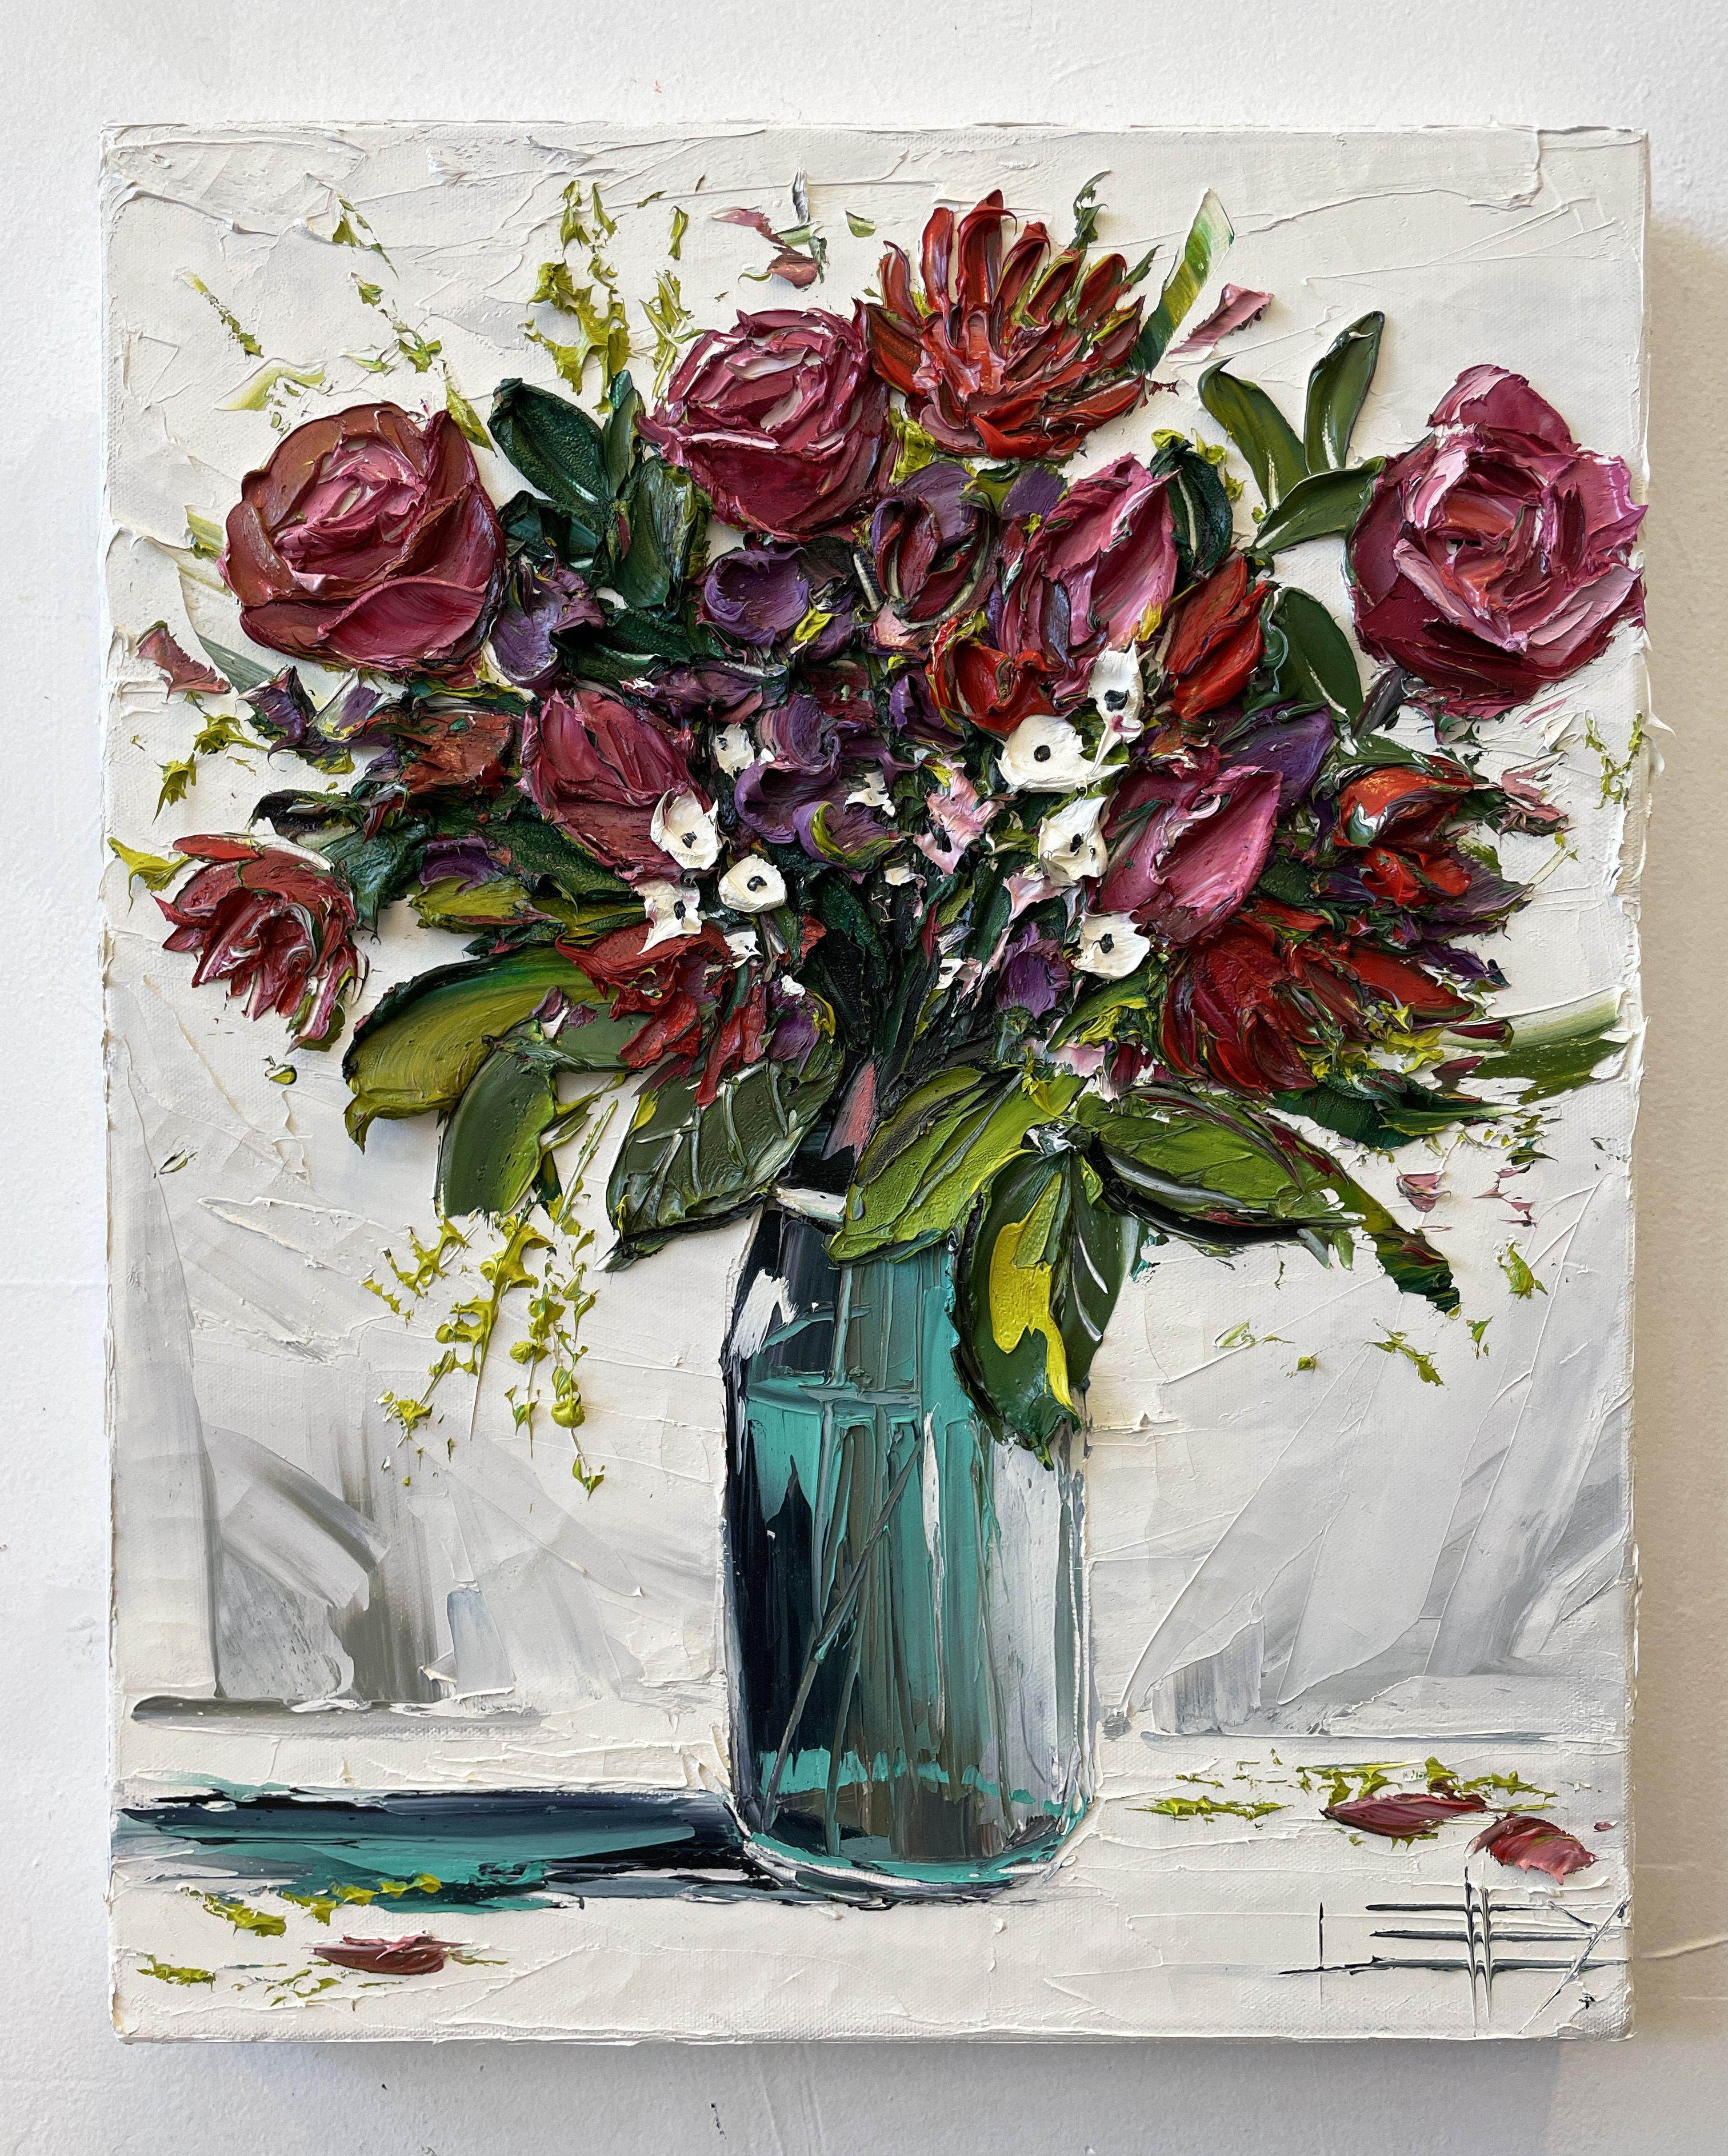 A textured painting in oil created in Lisa's signature deep impasto style. This painting features rich, thick roses, poppies and proteas in a lushly stylized palette knife theme.    A delicate palette of soft ivory, reds and blush balances the green